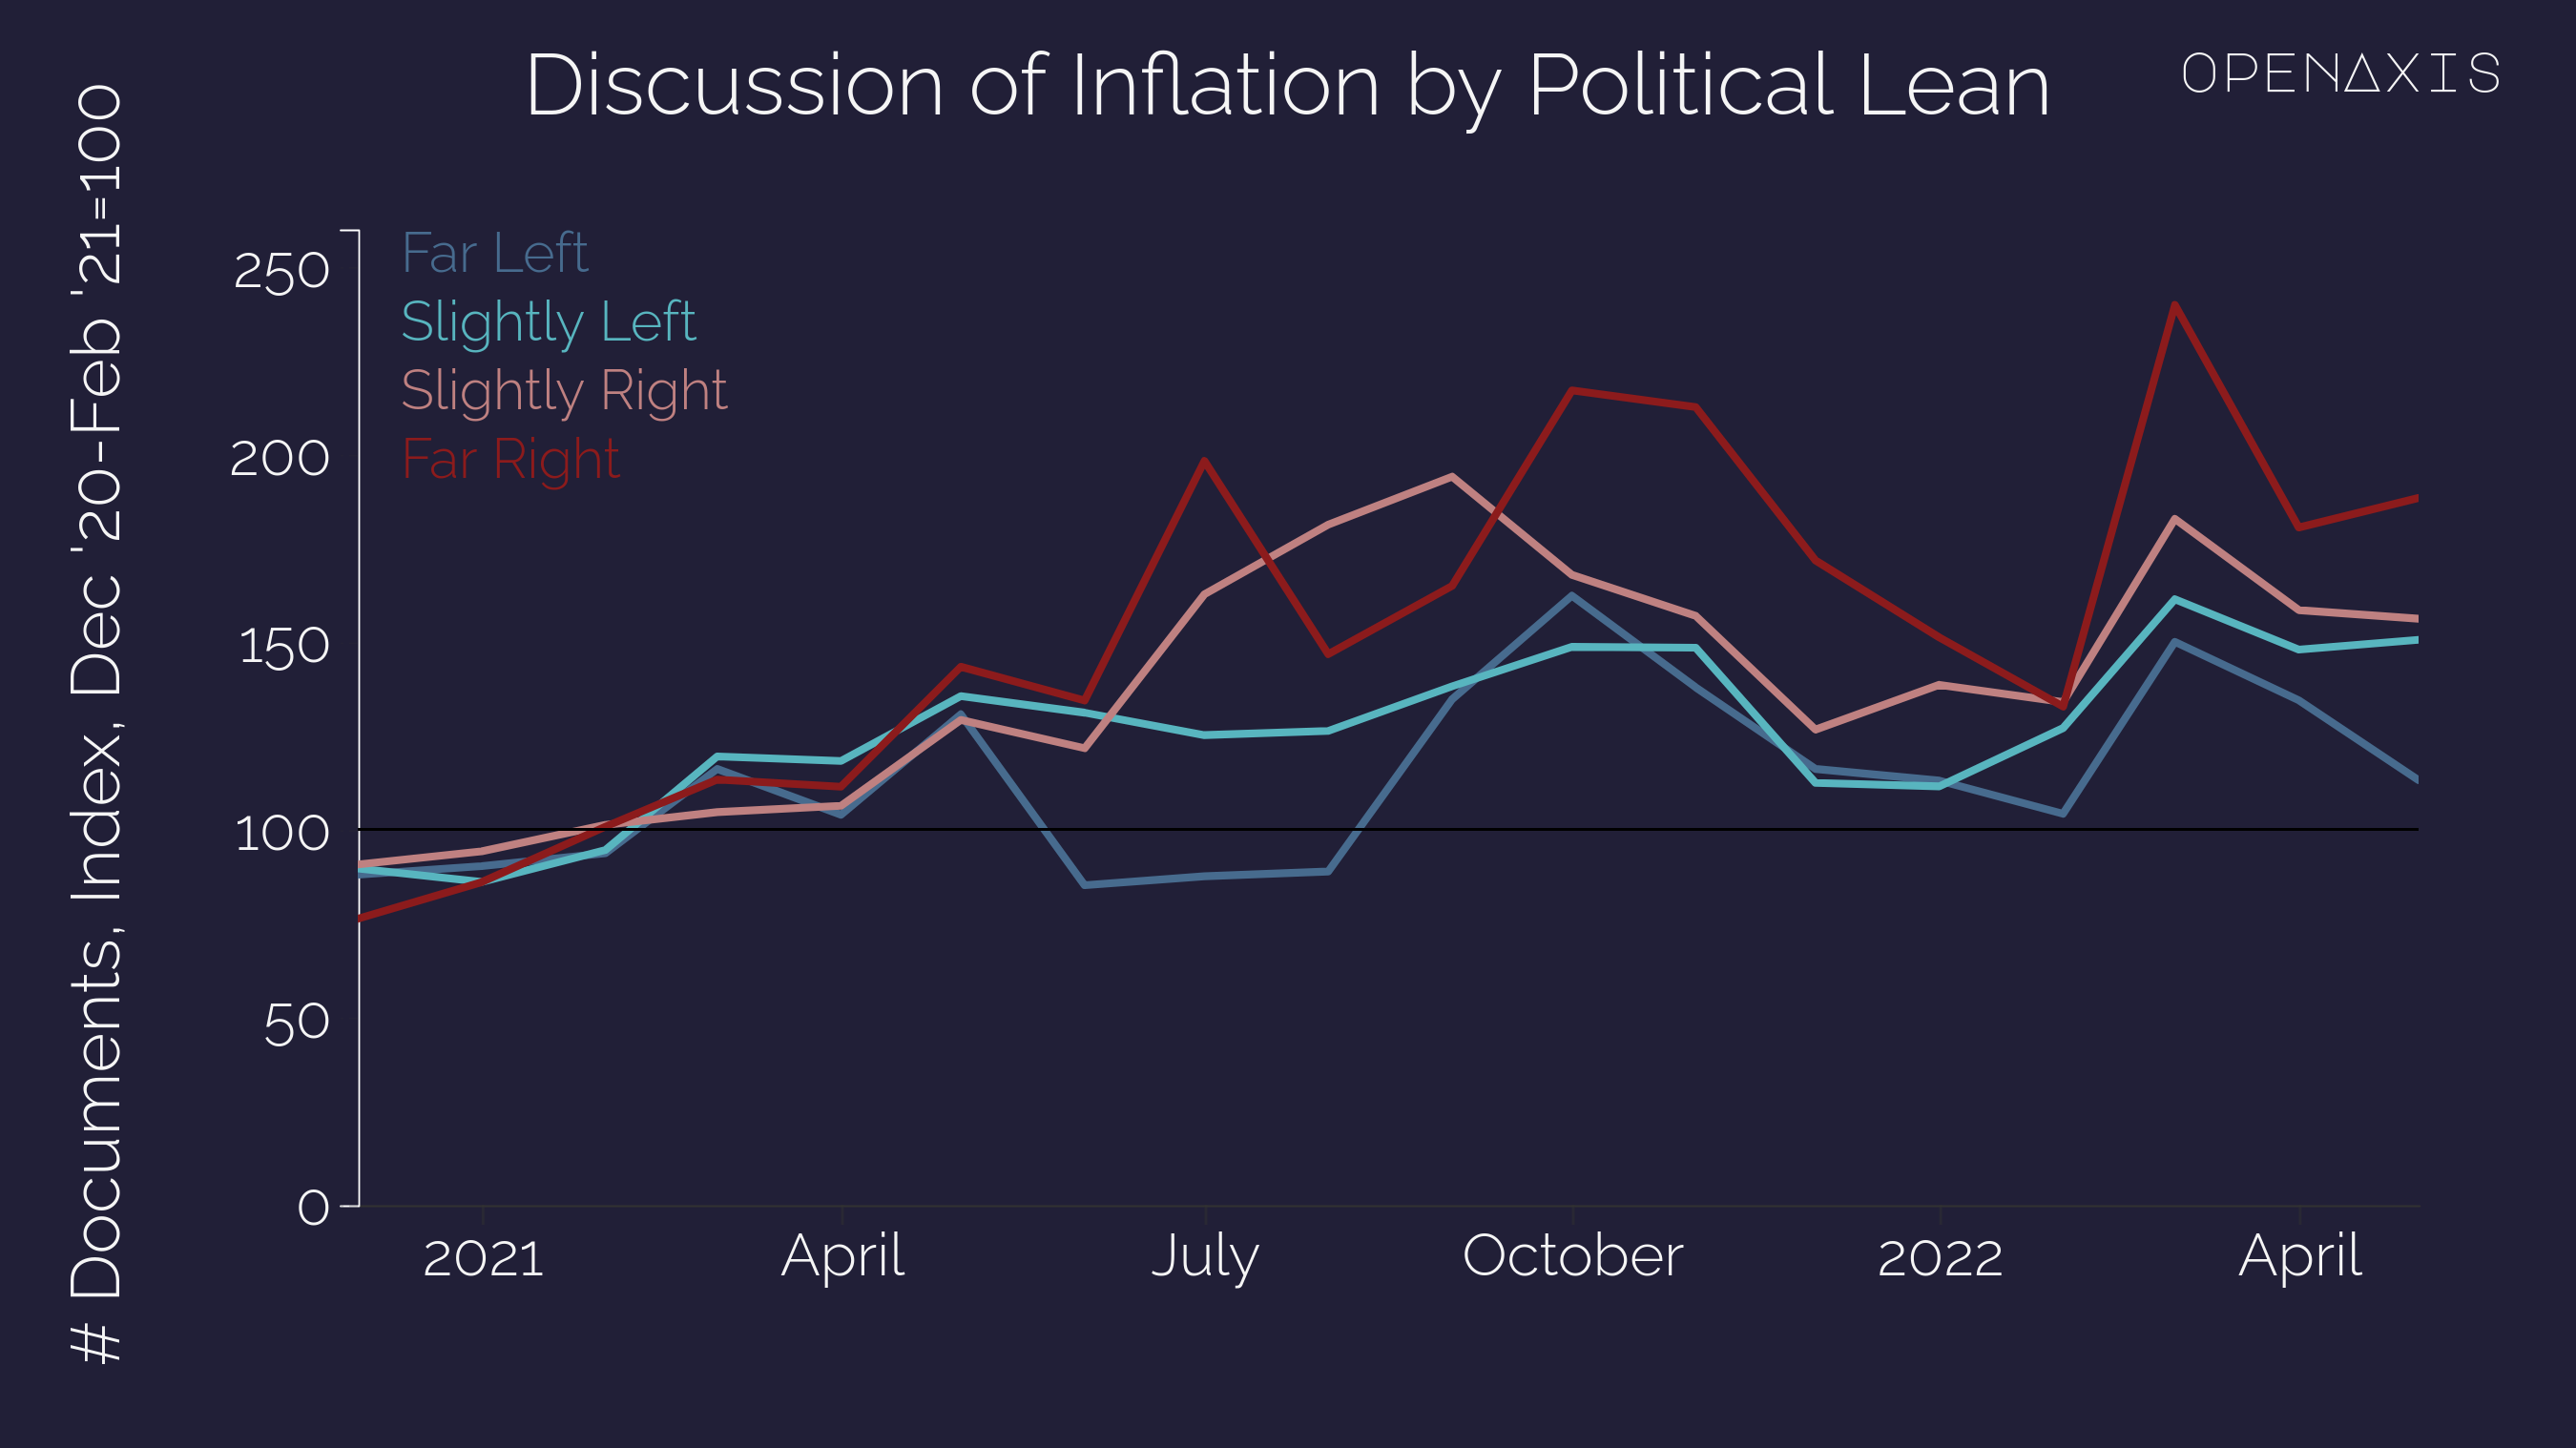 <p>Discussion of inflation by outlets/sites/authors of all political orientations has increased. However, the Far Right media and Slightly Right media have increased their coverage of inflation more than the Far Left and Slightly Left, especially since the turn of 2021 when President Biden took office.</p><p><br /></p><p>At its peak in March 2022, the Far Right was talking about inflation 2.4 times the rate they were Dec 2020-Feb-2021 while the Far Left was talking about inflation 1.5 times the rate they were in Dec 2020-Feb-2021. The period Dec 2020-Feb-2021 was chosen as the base because it’s roughly half before and half after Biden’s inauguration.</p><p><br /></p><p>Source: <a href="https://app.openaxis.com/data/3870" target="_blank">PeakMetrics</a></p>